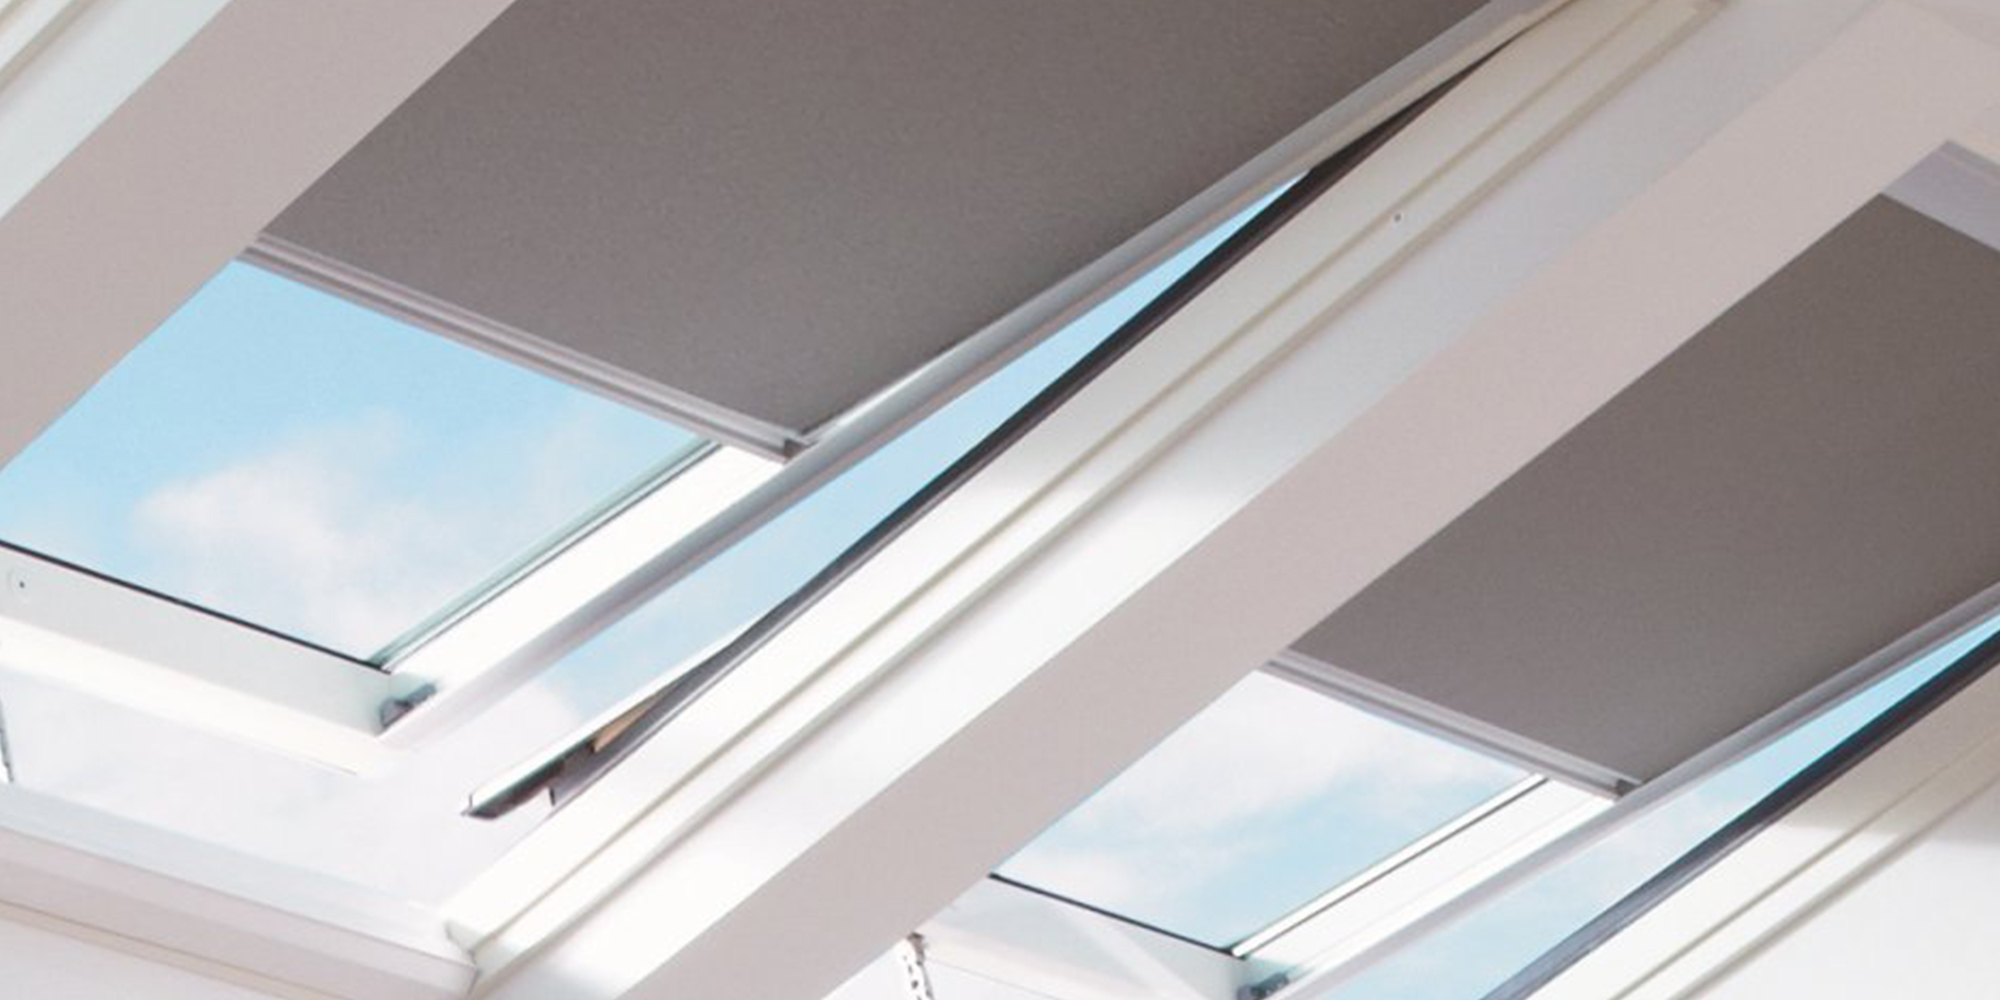 Velux black-out skylight blinds example